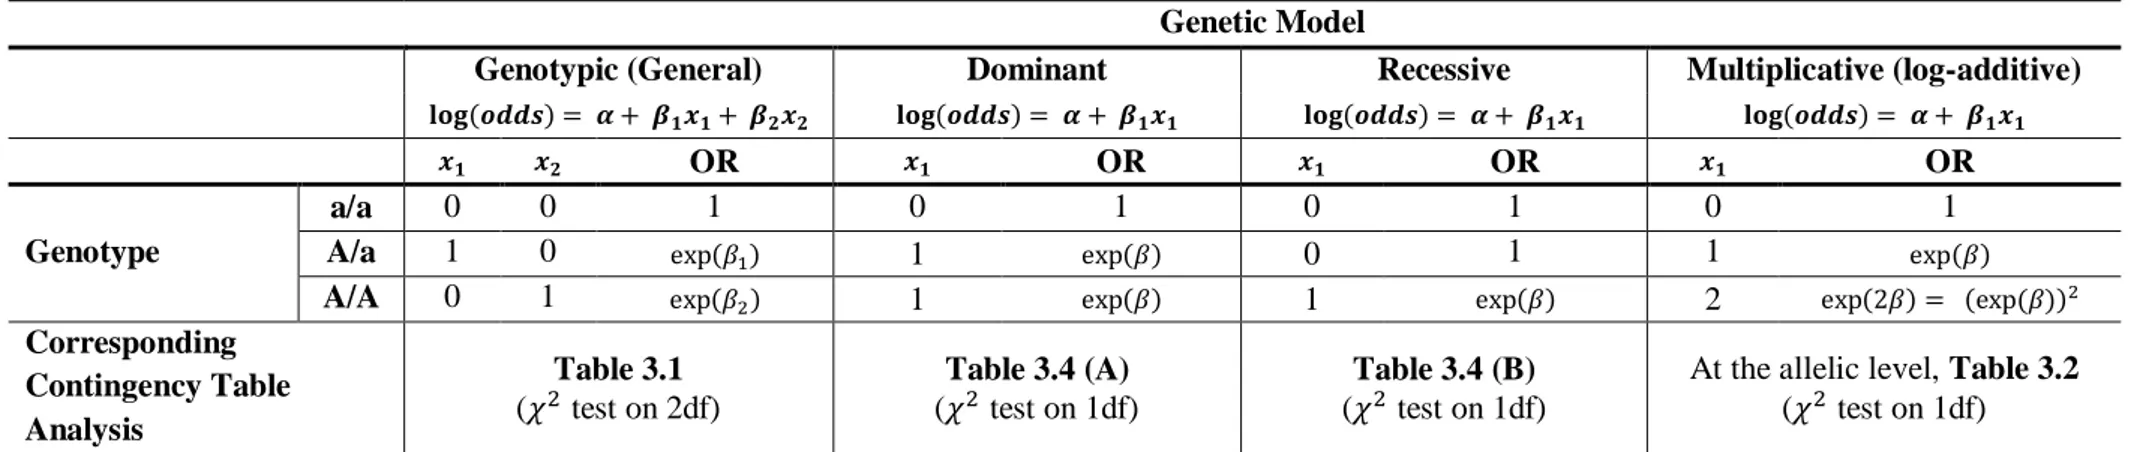 Table 3.5: Parameterization of genetic models in a logistic regression framework and the corresponding contingency table analyses described in the text